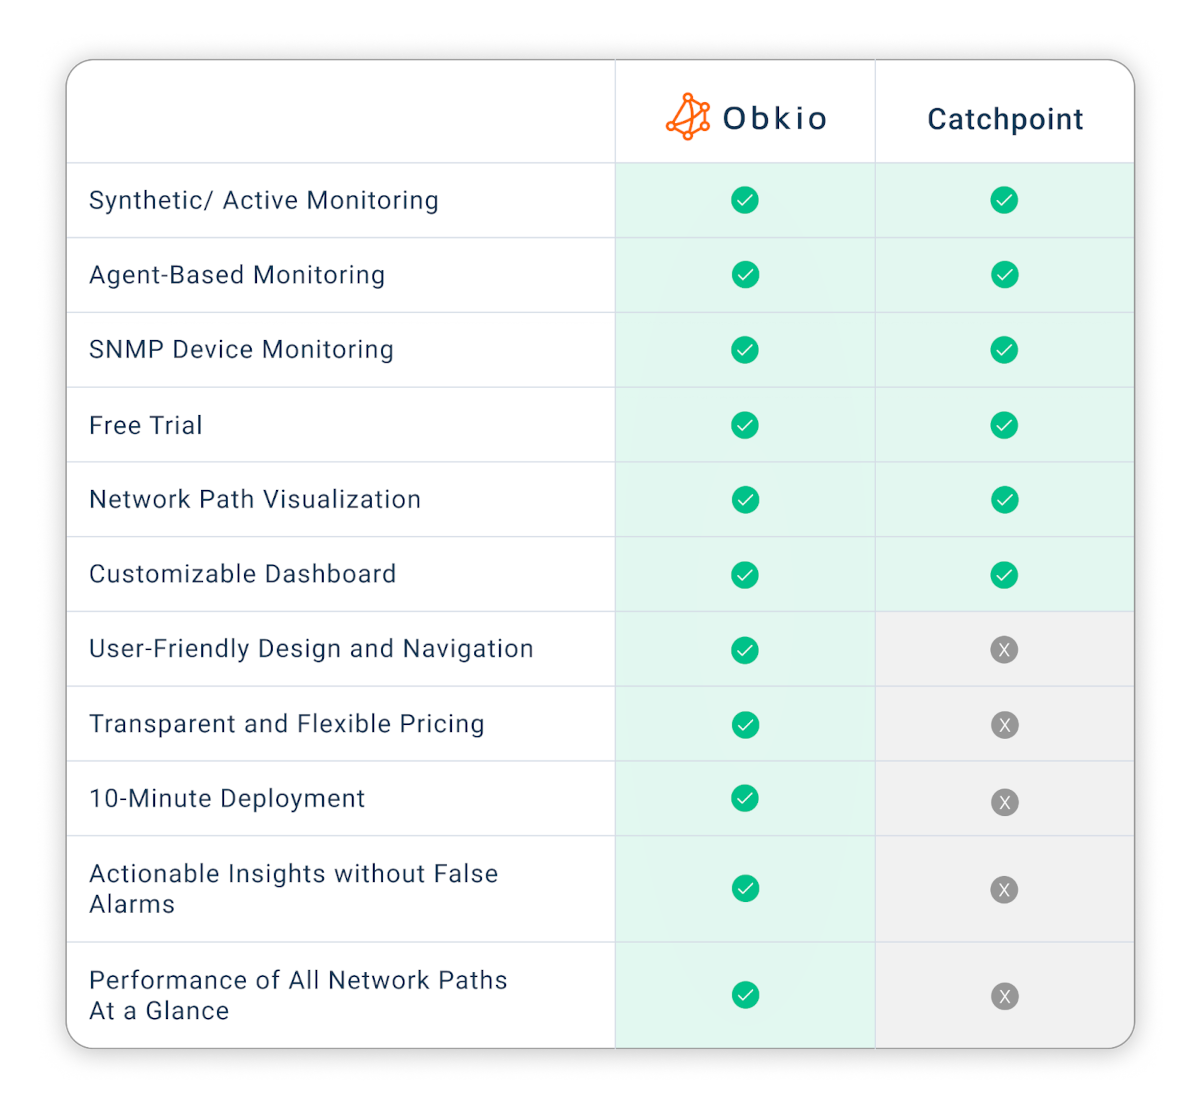 obkio vs. Catchpoint alternative network monitoring tool